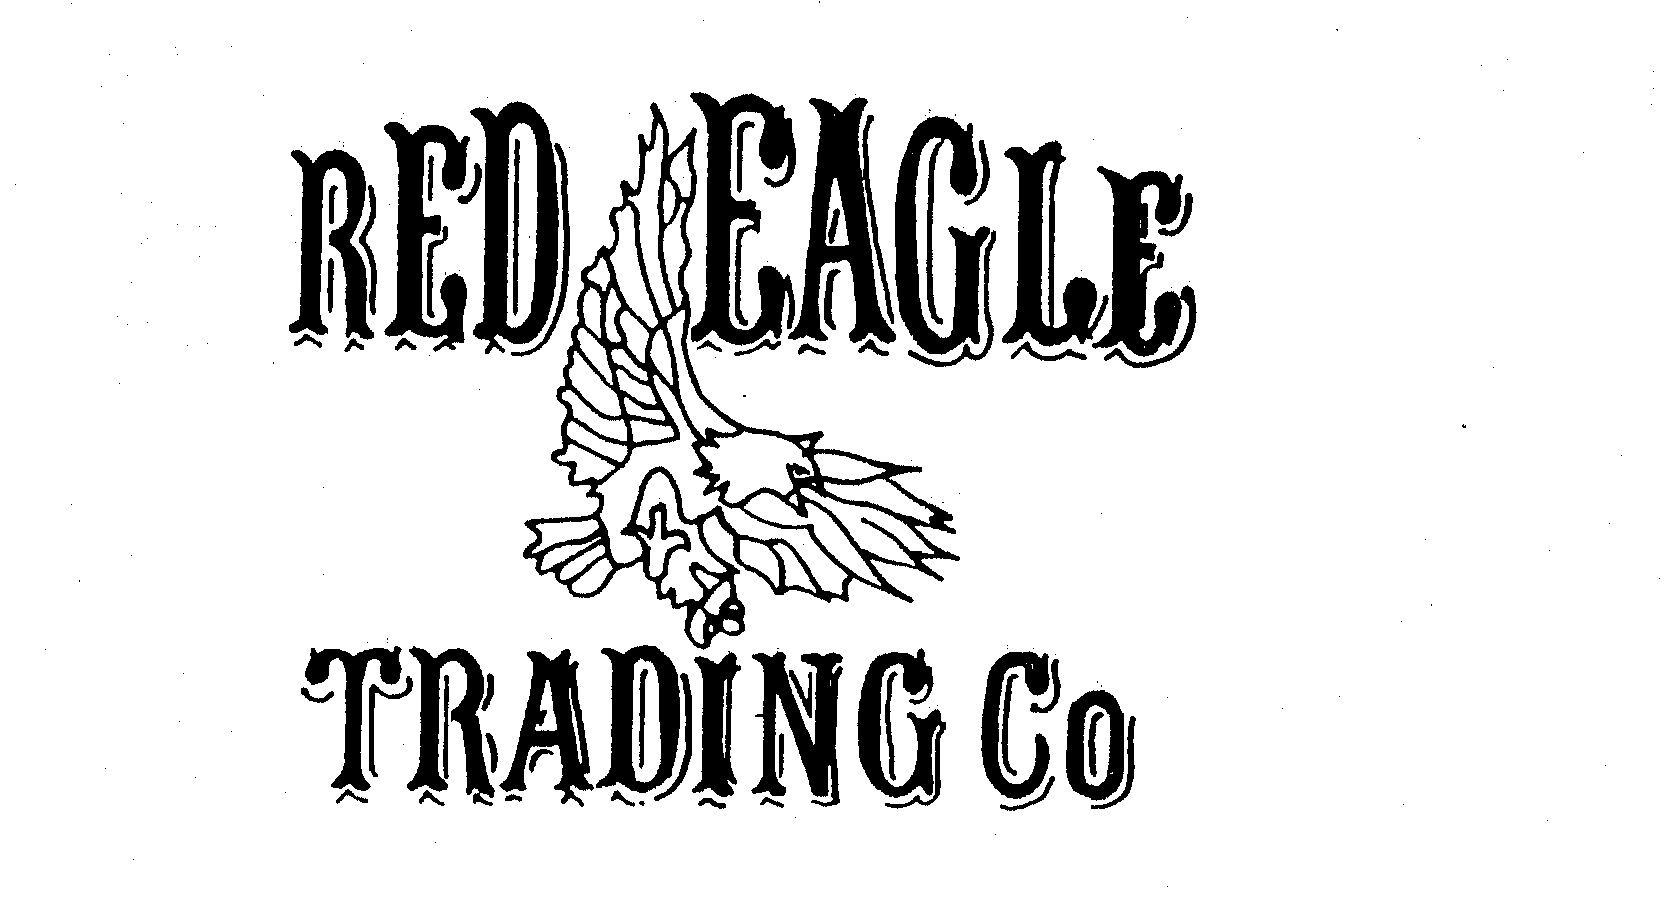  RED EAGLE TRADING CO